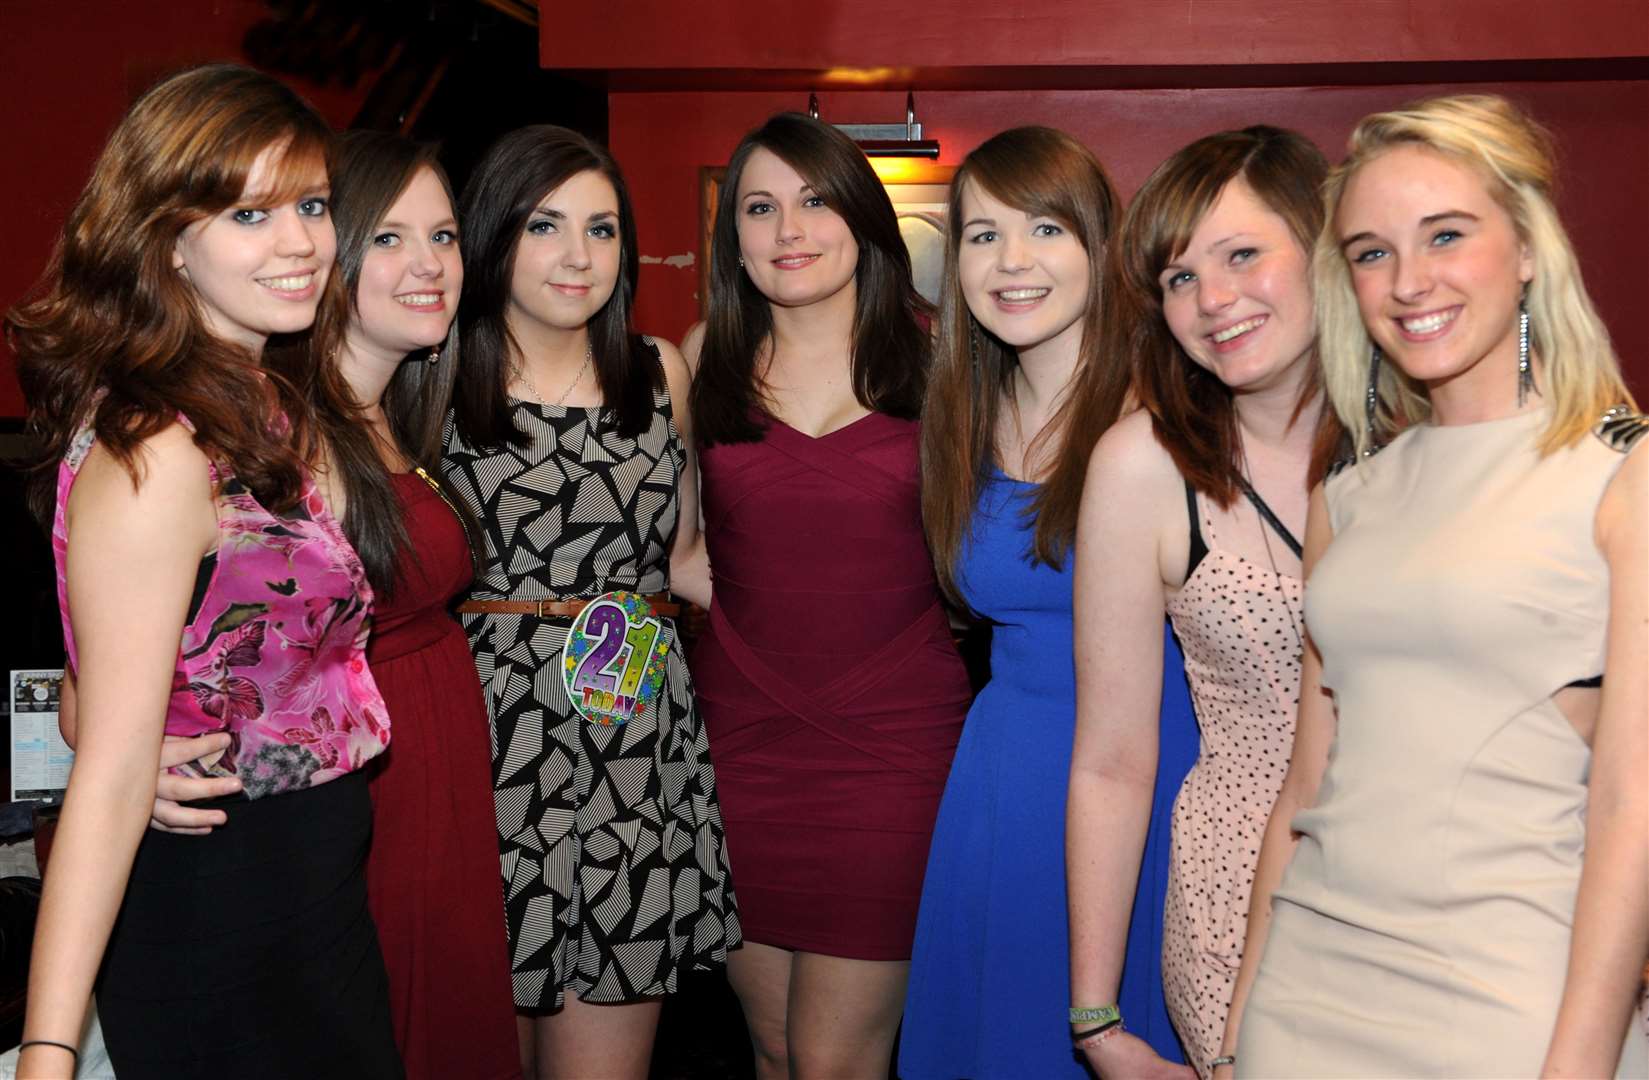 Sarah-Louise Mackintosh (3rd left) celebrates her 21st birthday with friends.